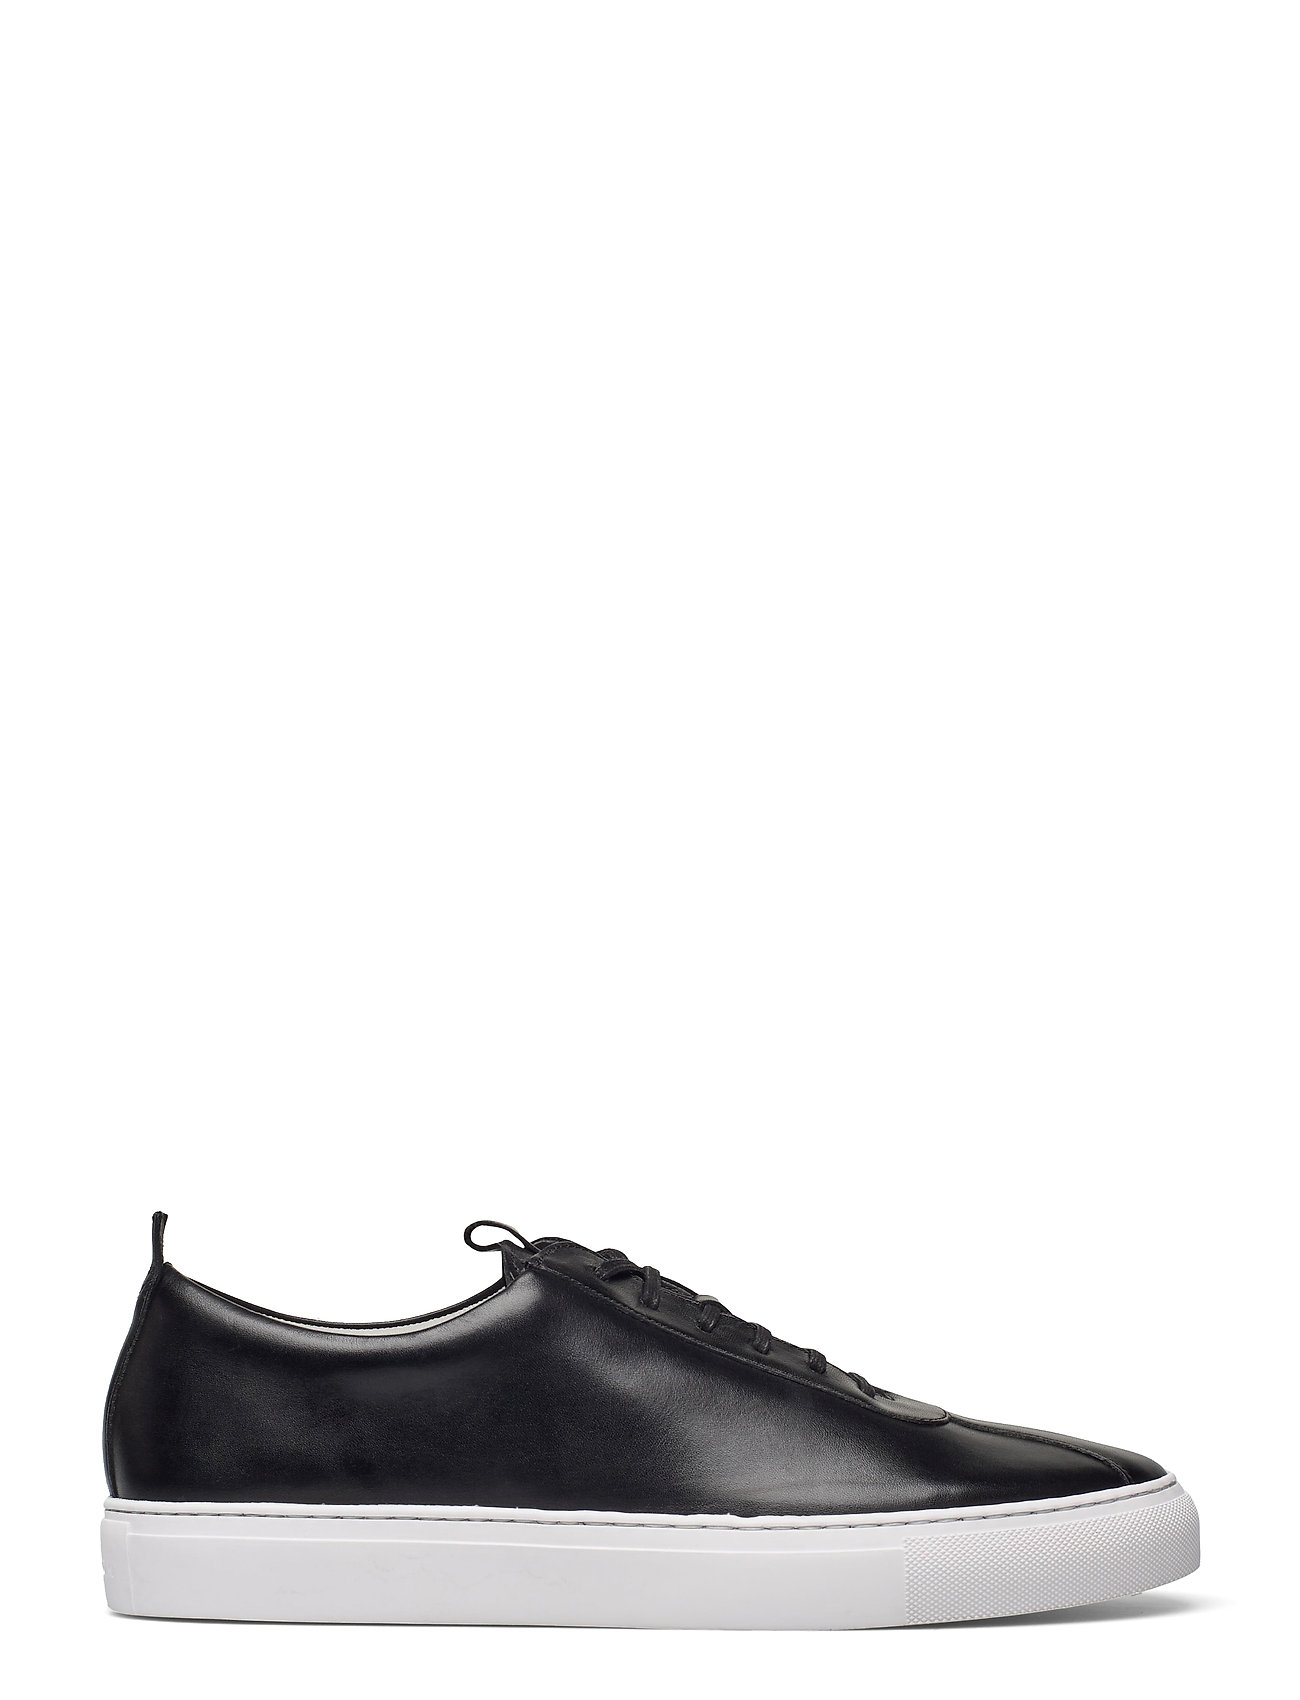 CALF Grenson 1 Low-top Sneakers Grenson sneakers for herre - Pashion.dk